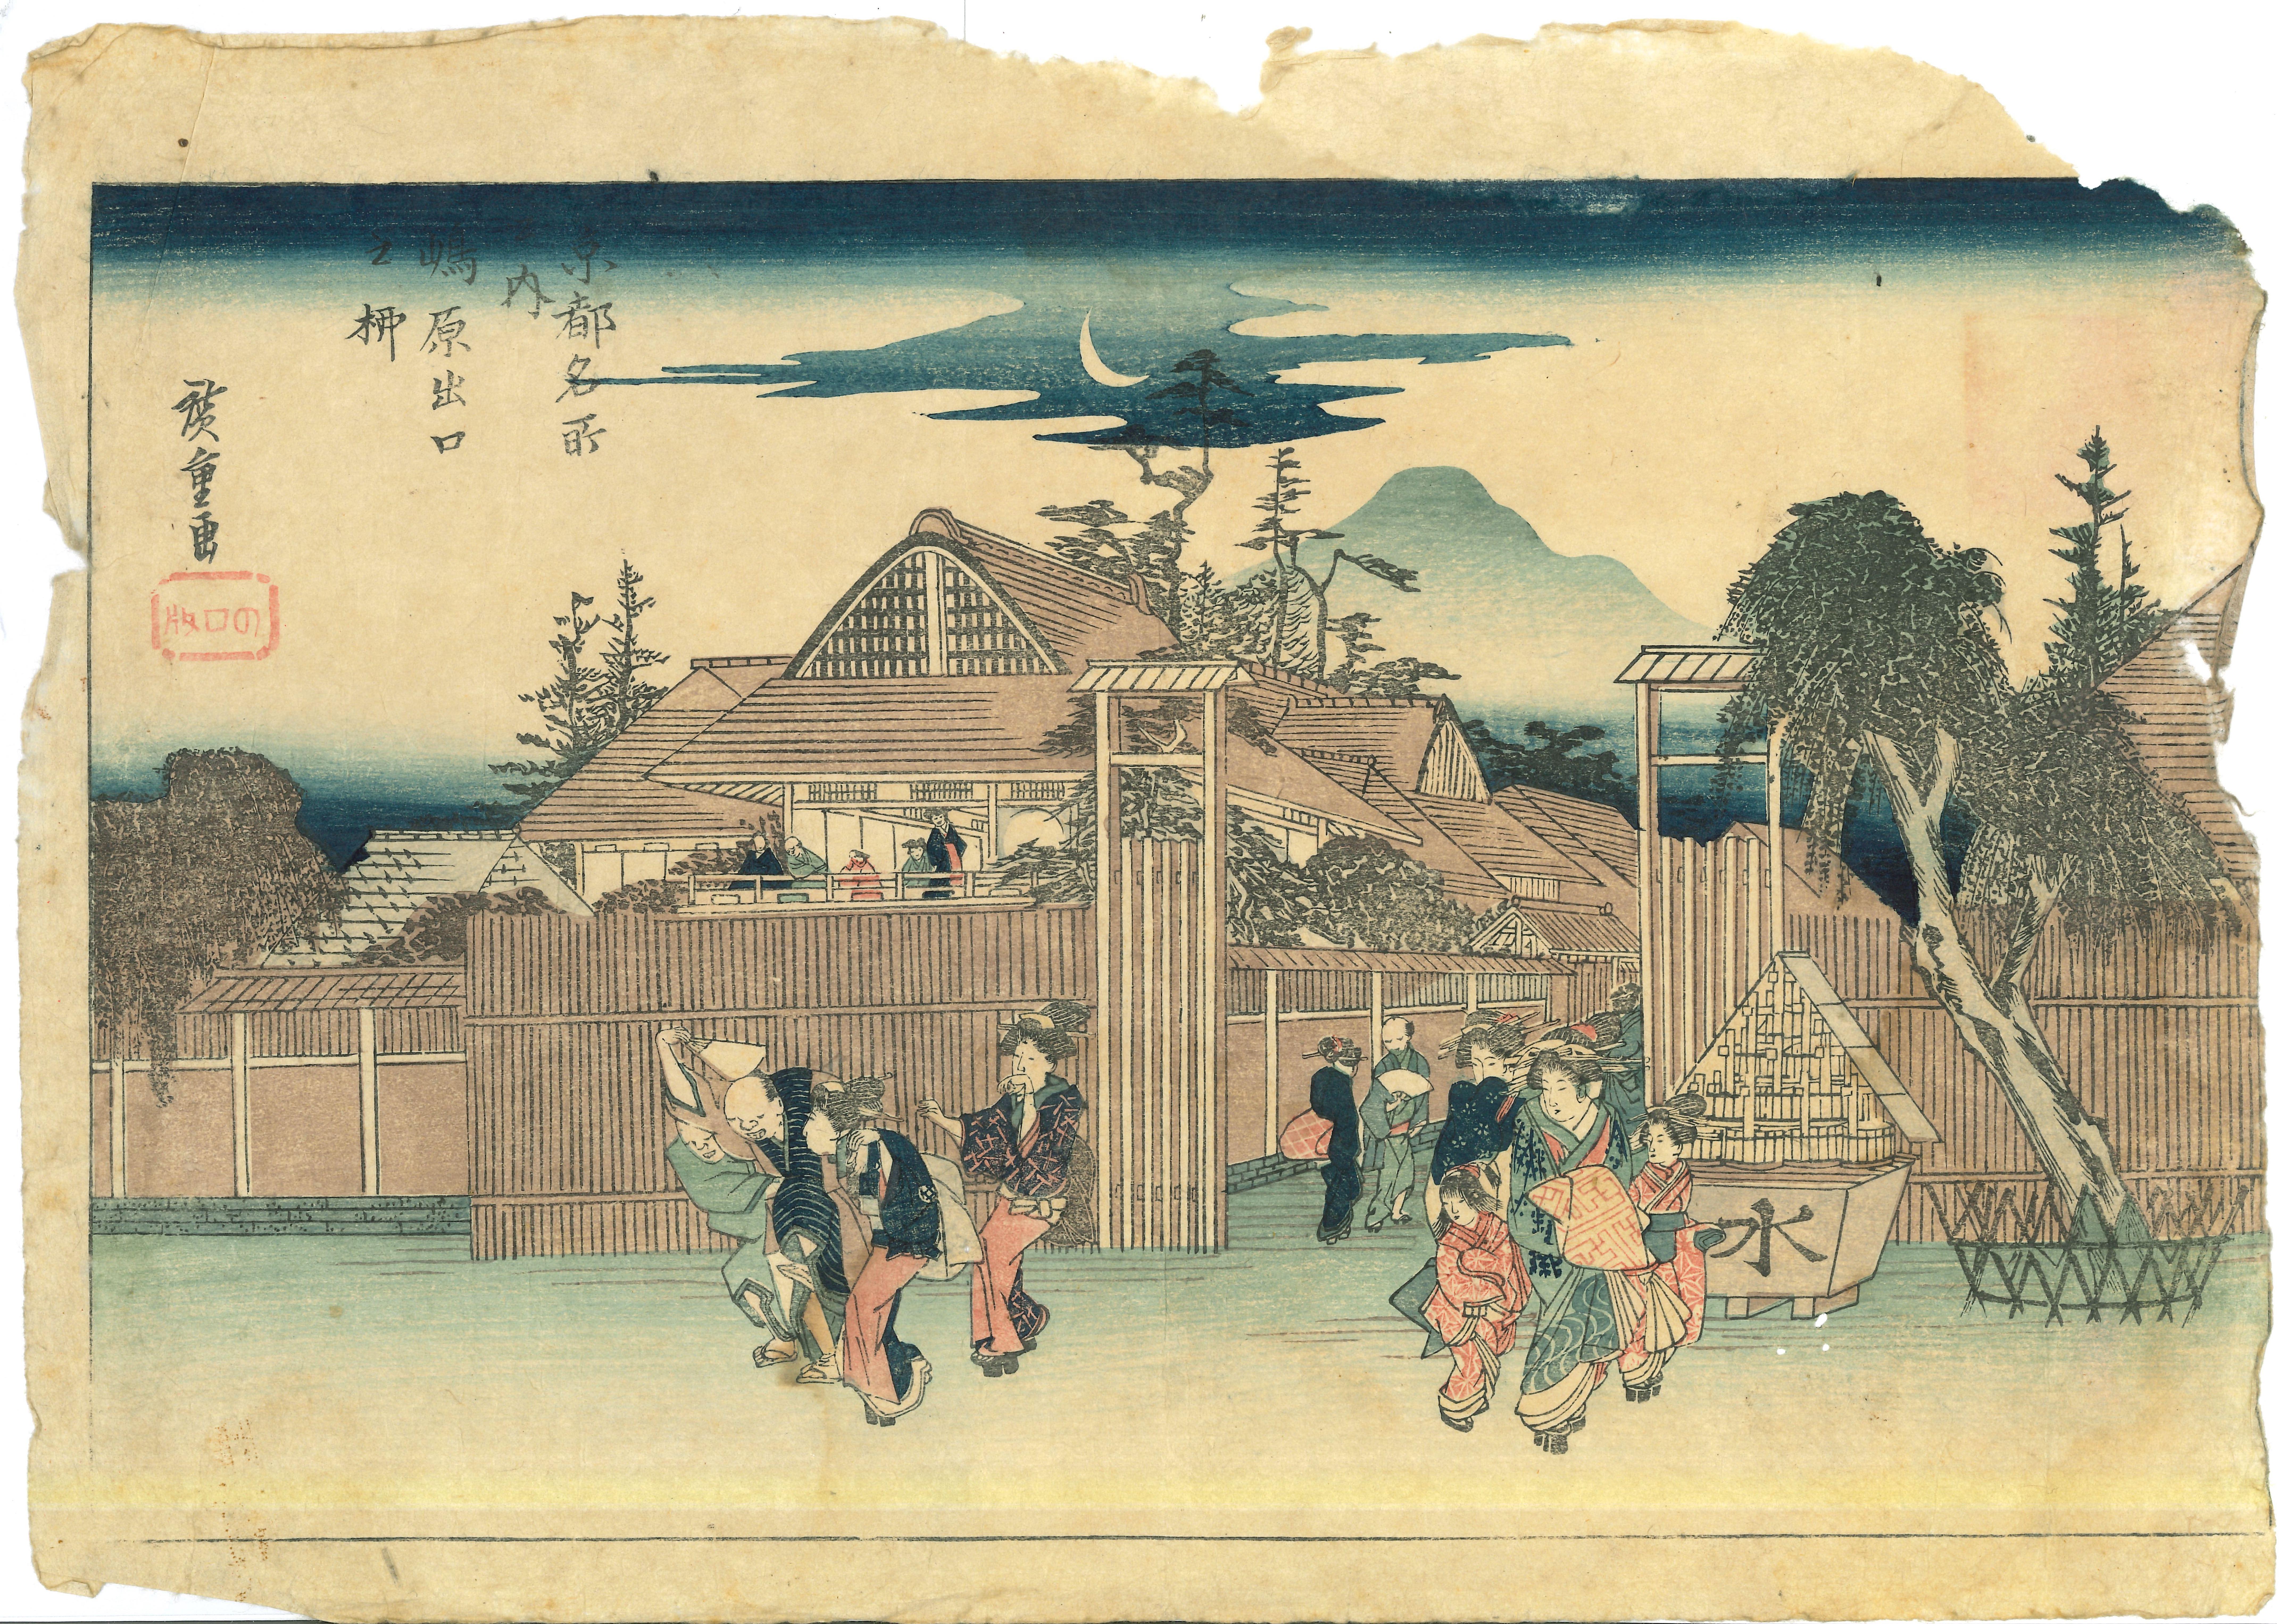 Shimabara (Moonlight, Gate of Licensed Quarter) is a polychrome woodblock print (nishiki-e, ink and colour on paper) by Utagawa Hiroshige (Japanese, 1797-1858). This is a plate, from the printed series Kyoto meisho no uchi (Famous Views of Kyoto),